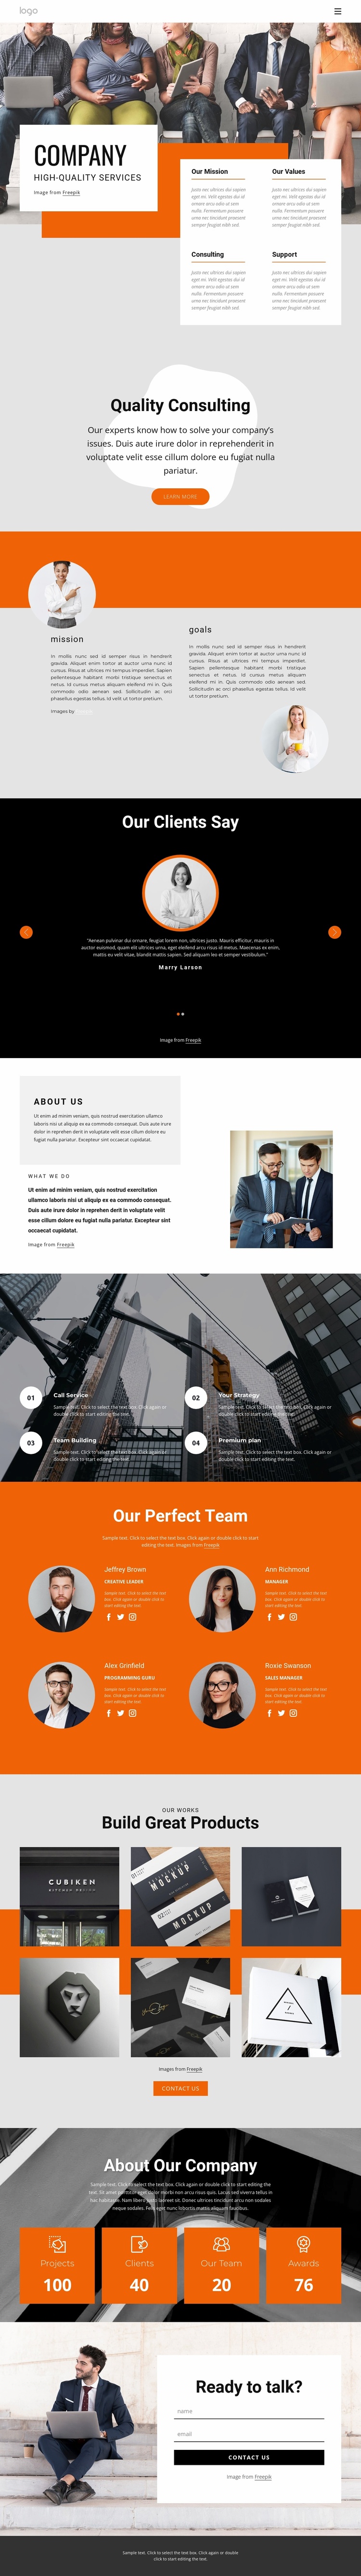 Hight quality consulting firm Website Template